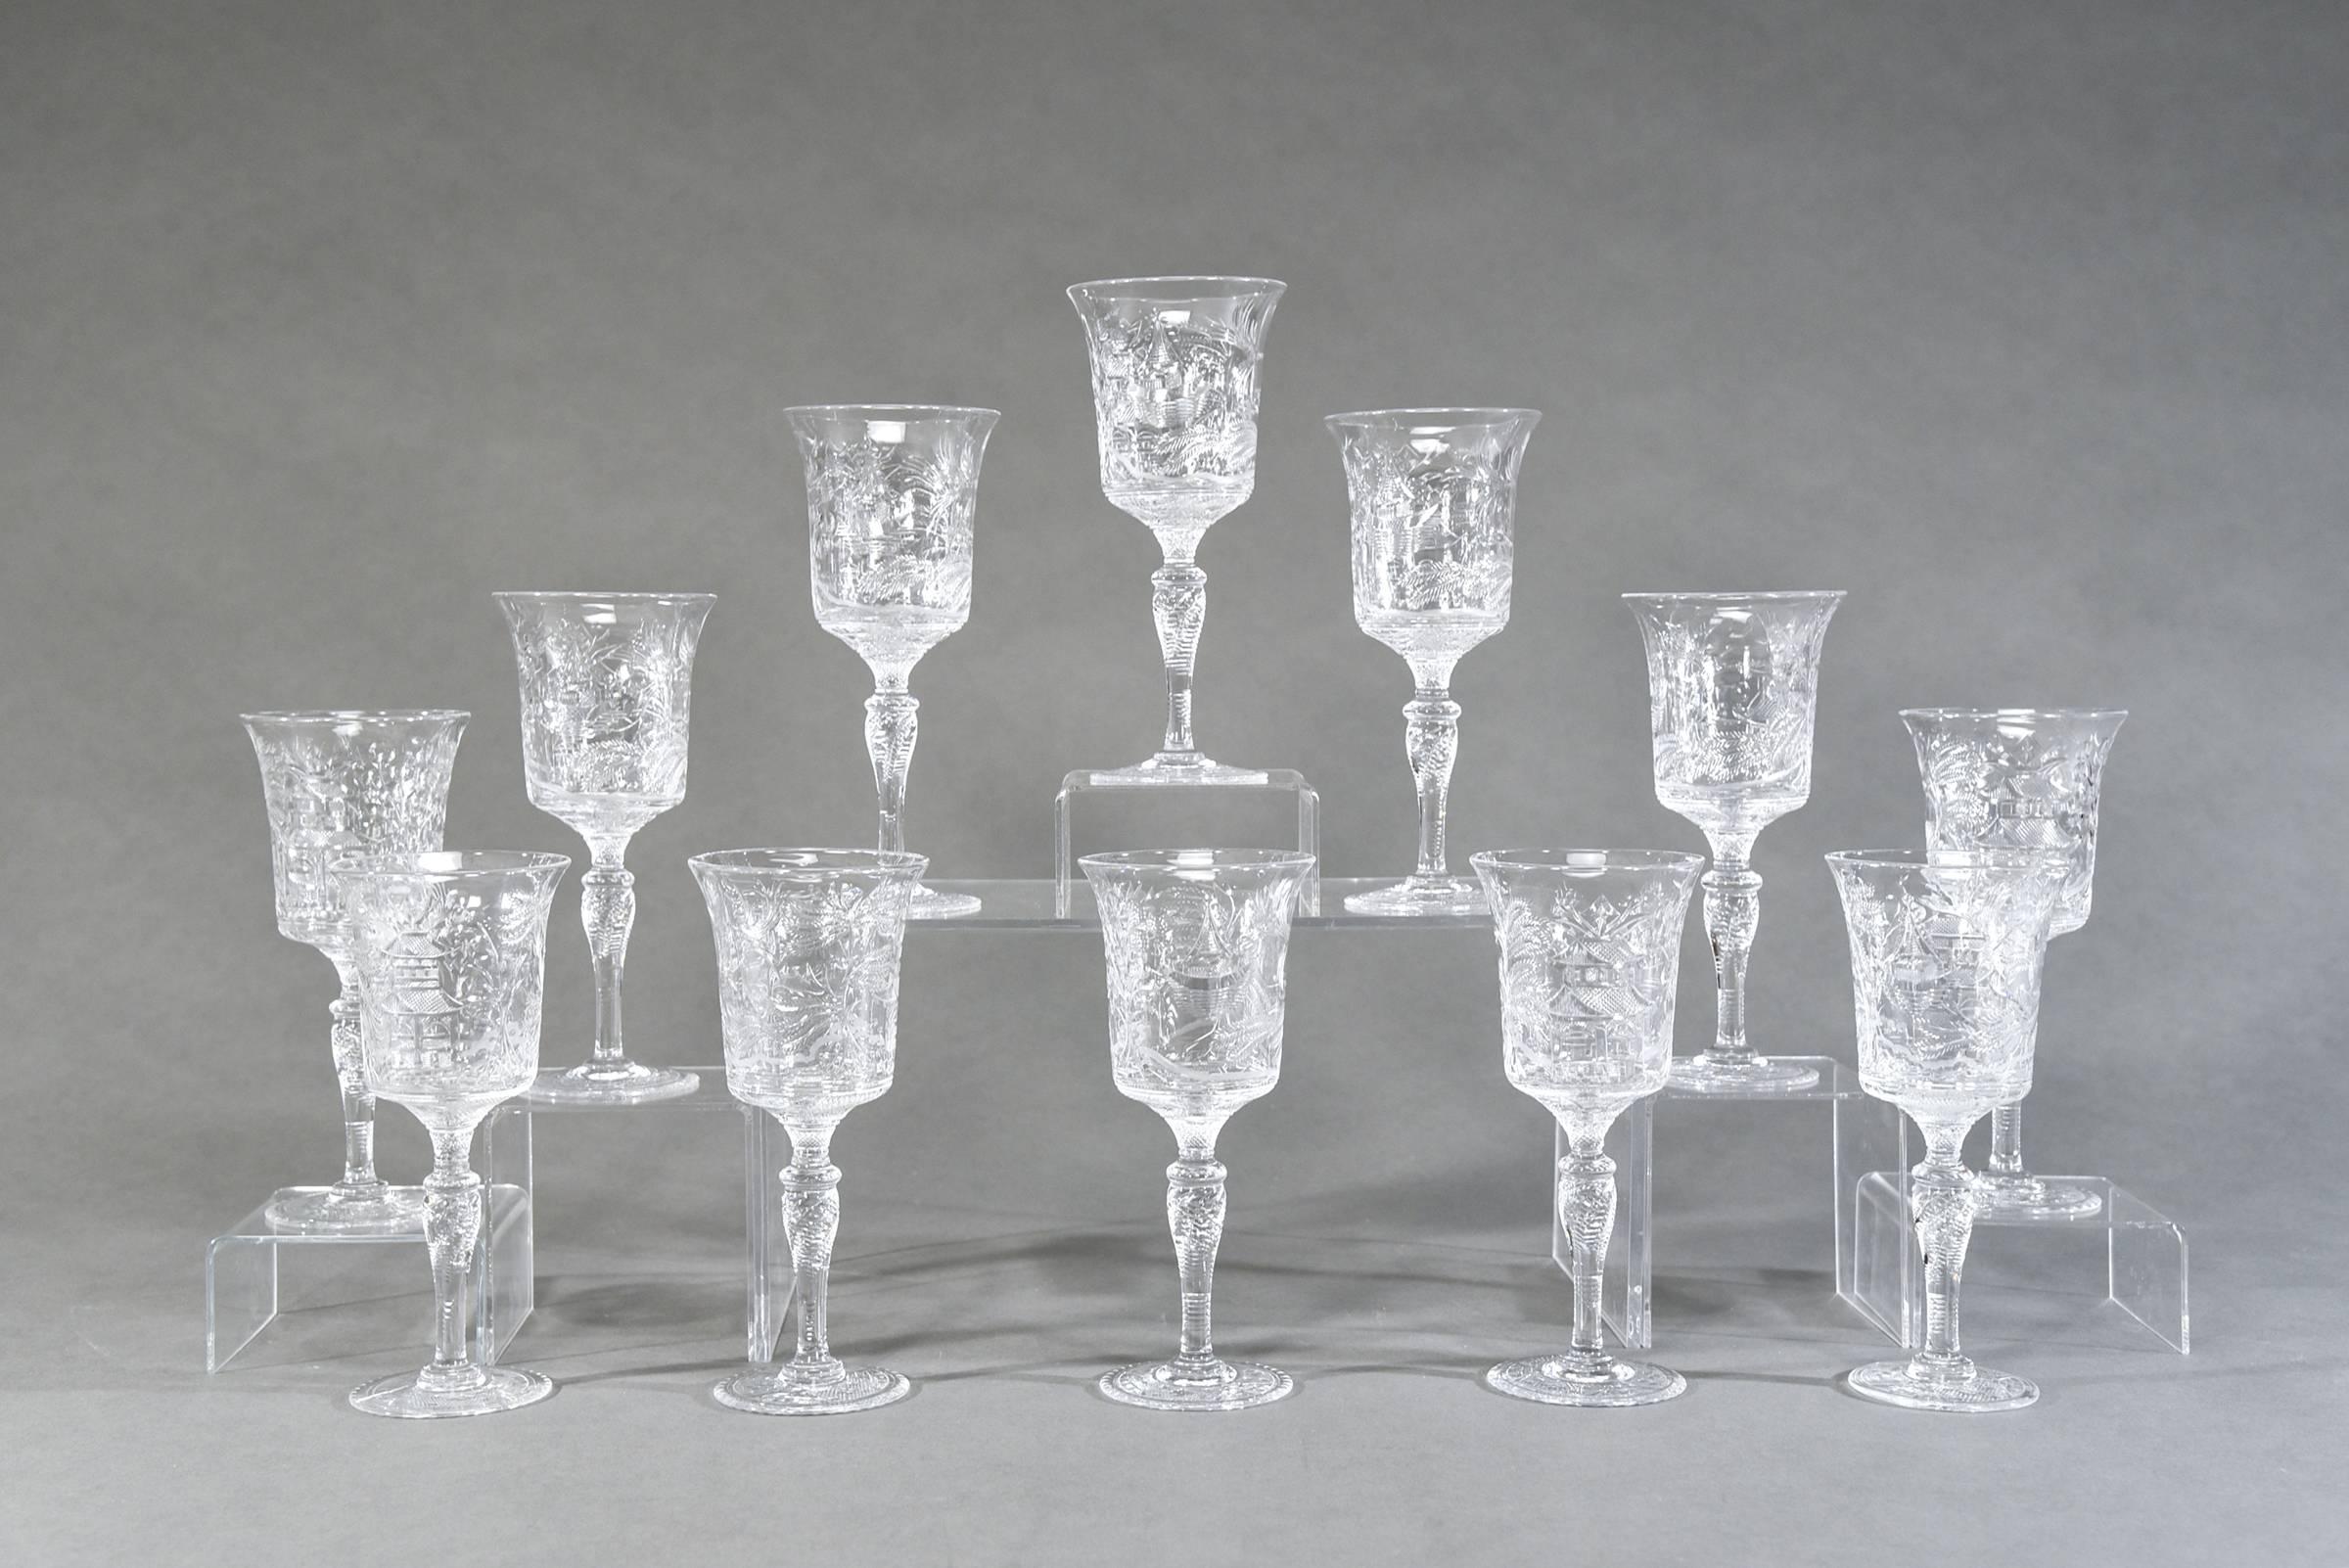 This is a rare set of 12 hand blown water goblets made by Stevens and Williams, England, circa 1910. The 8